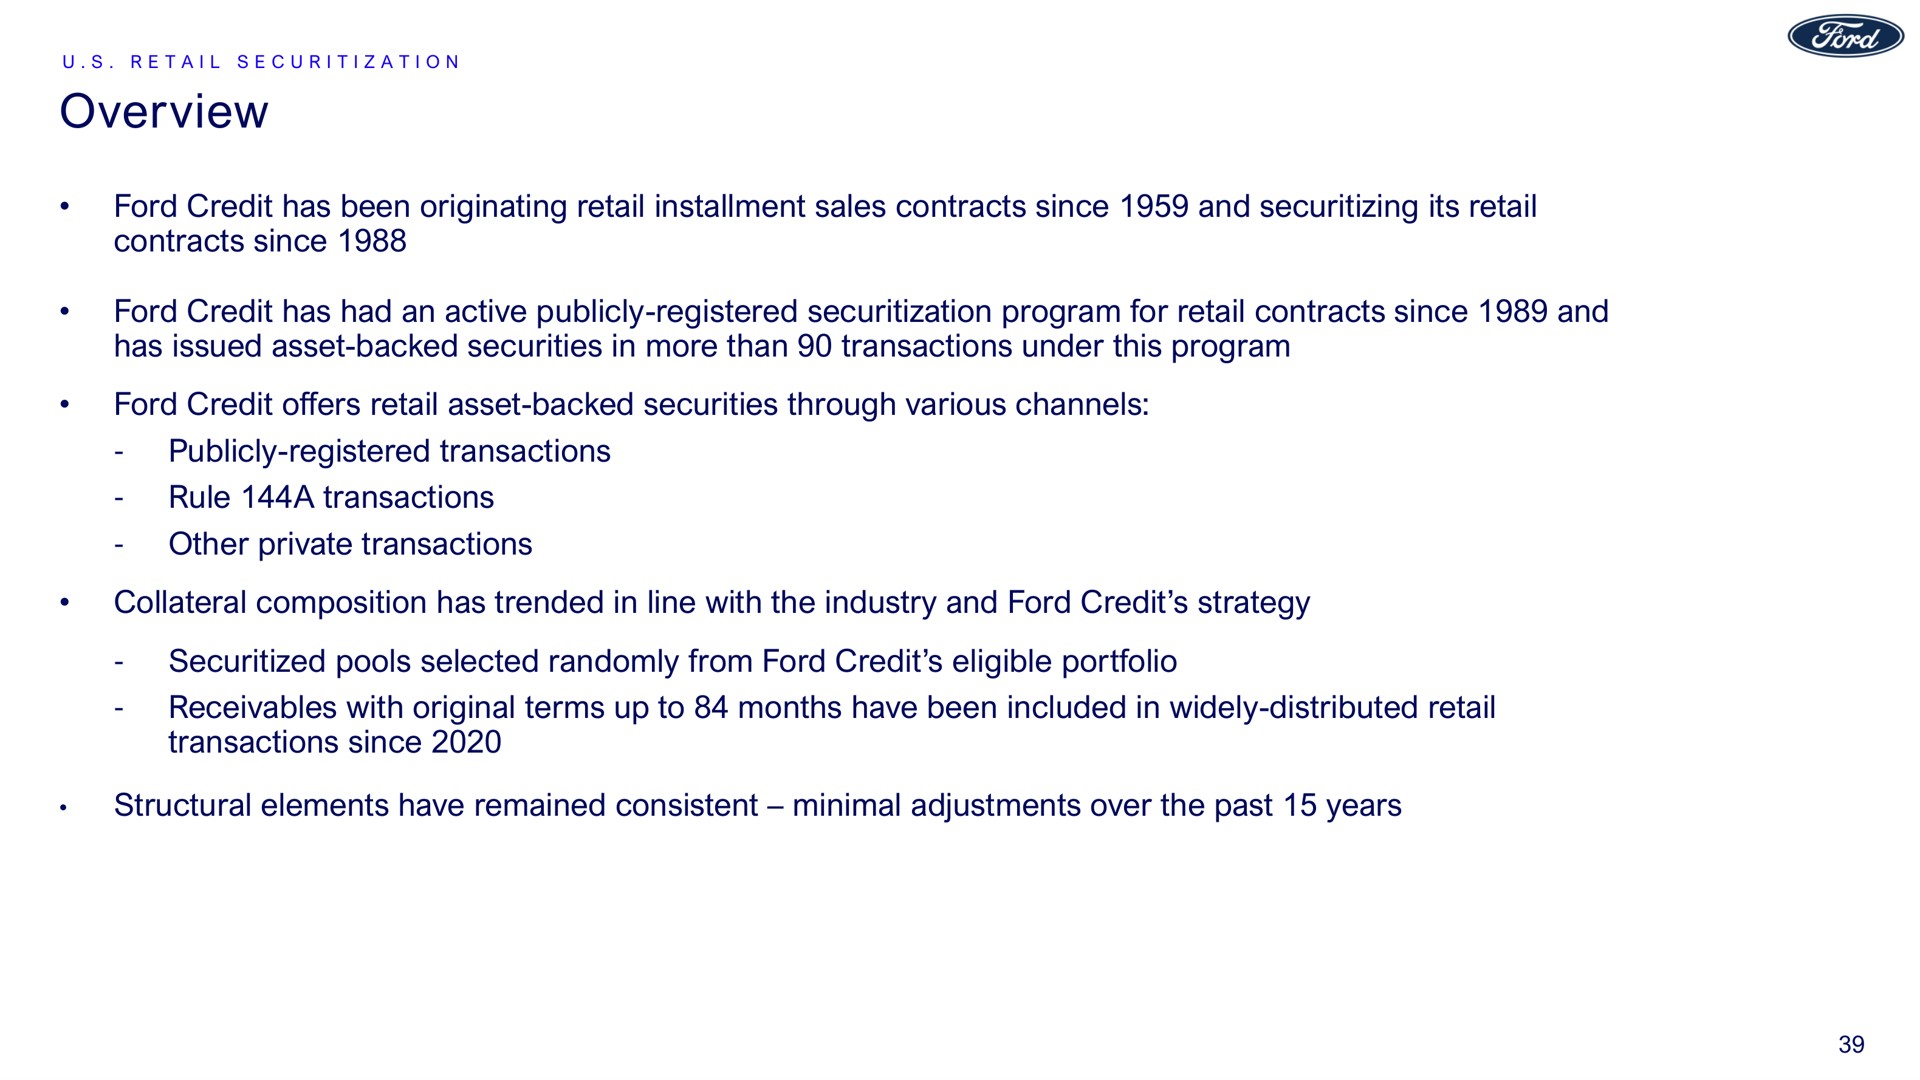 overview ford credit has been originating retail installment sales contracts since and its retail contracts since ford credit has had an active publicly registered program for retail contracts since and has issued asset backed securities in more than transactions under this program ford credit offers retail asset backed securities through various channels publicly registered transactions rule a transactions other private transactions collateral composition has trended in line with the industry and ford credit strategy pools selected randomly from ford credit eligible portfolio receivables with original terms up to months have been included in widely distributed retail transactions since structural elements have remained consistent minimal adjustments over the past years | Ford